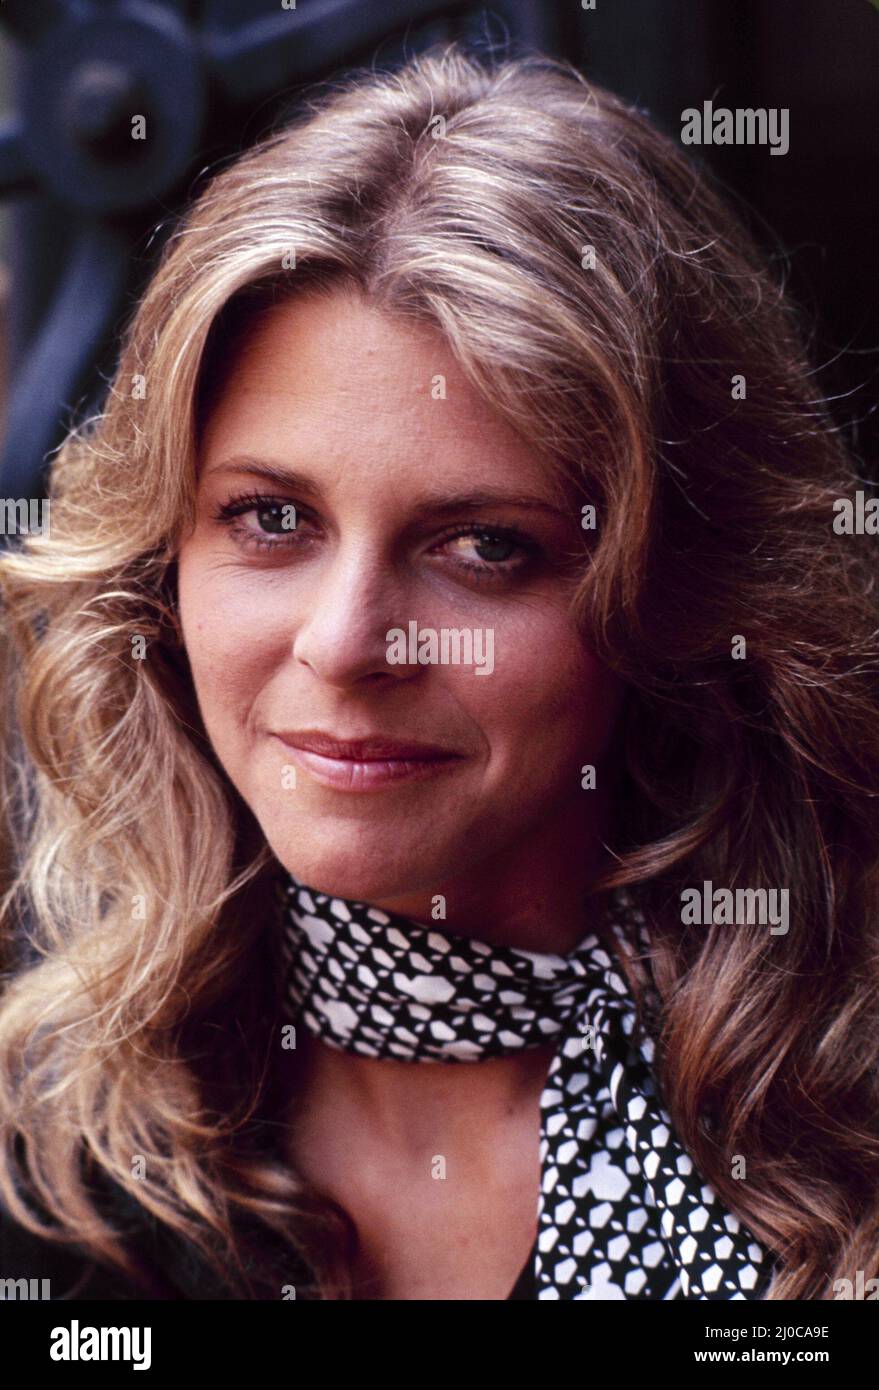 LINDSAY WAGNER in THE SIX MILLION DOLLAR MAN (1974), directed by RICHARD  DONNER, RICHARD IRVING, JERRY LONDON and ERNEST PINTOFF. Credit: Universal  Pictures Television / Album Stock Photo - Alamy